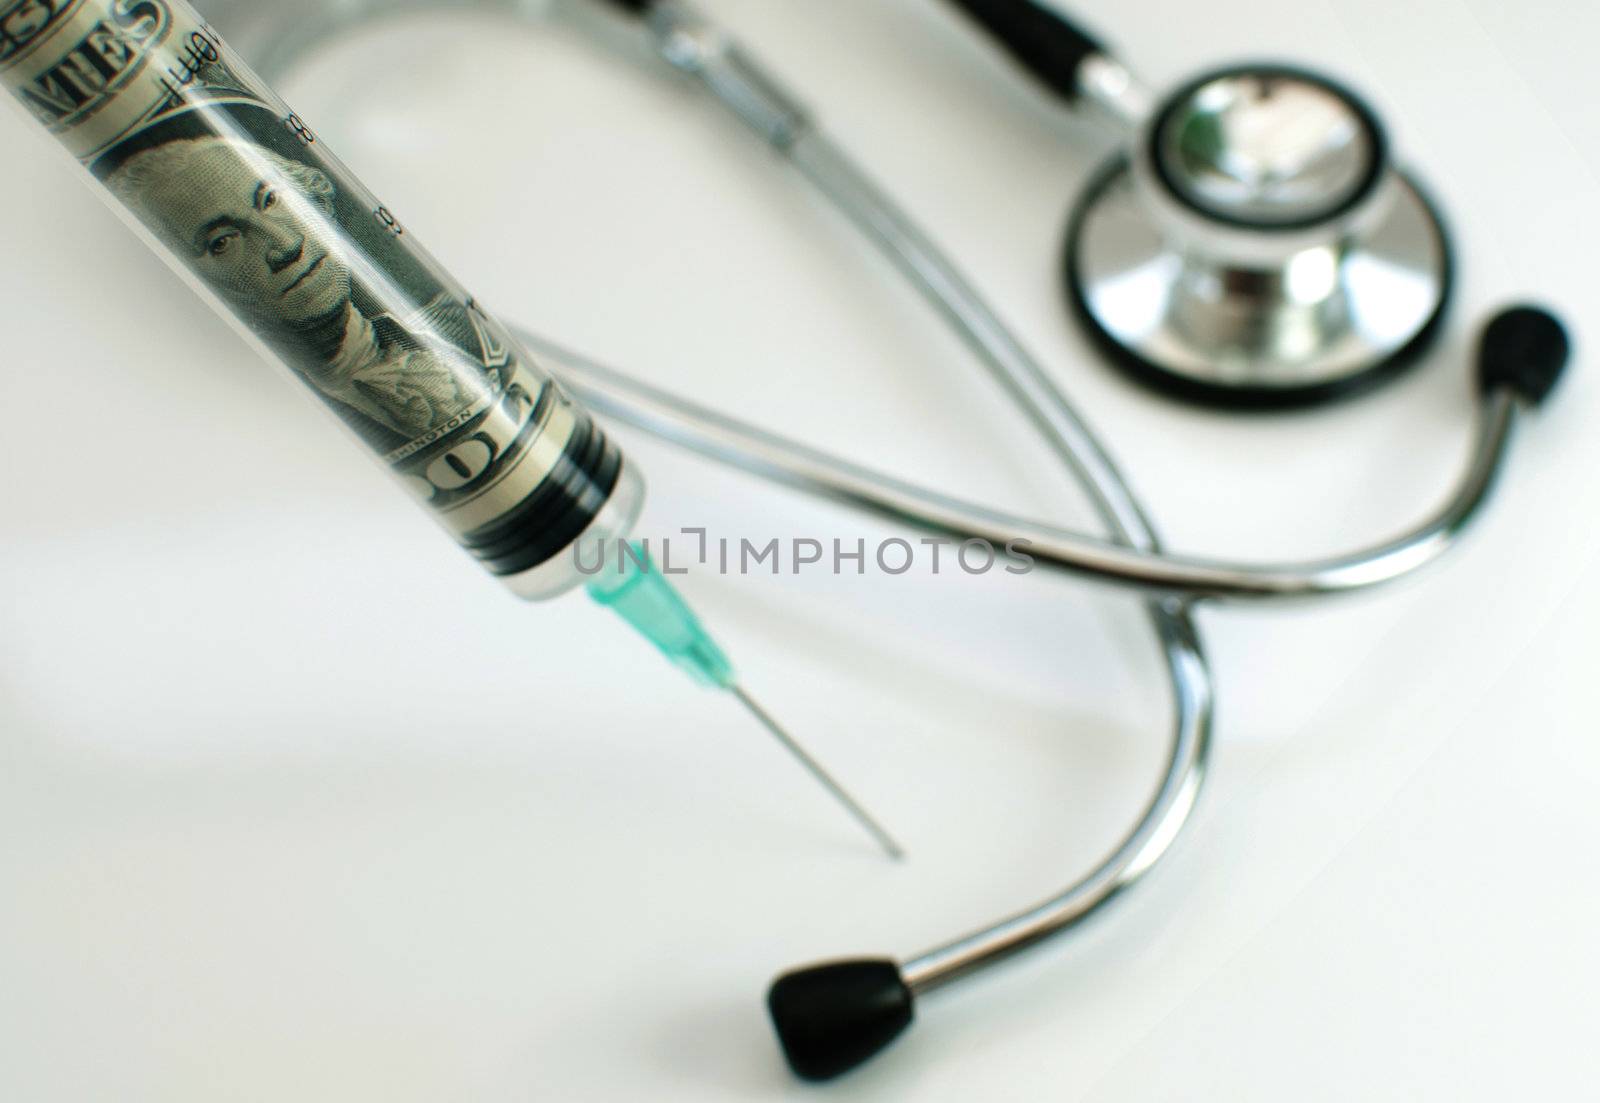 Injection needle consisting of dollar banknotes with a medical stethoscope